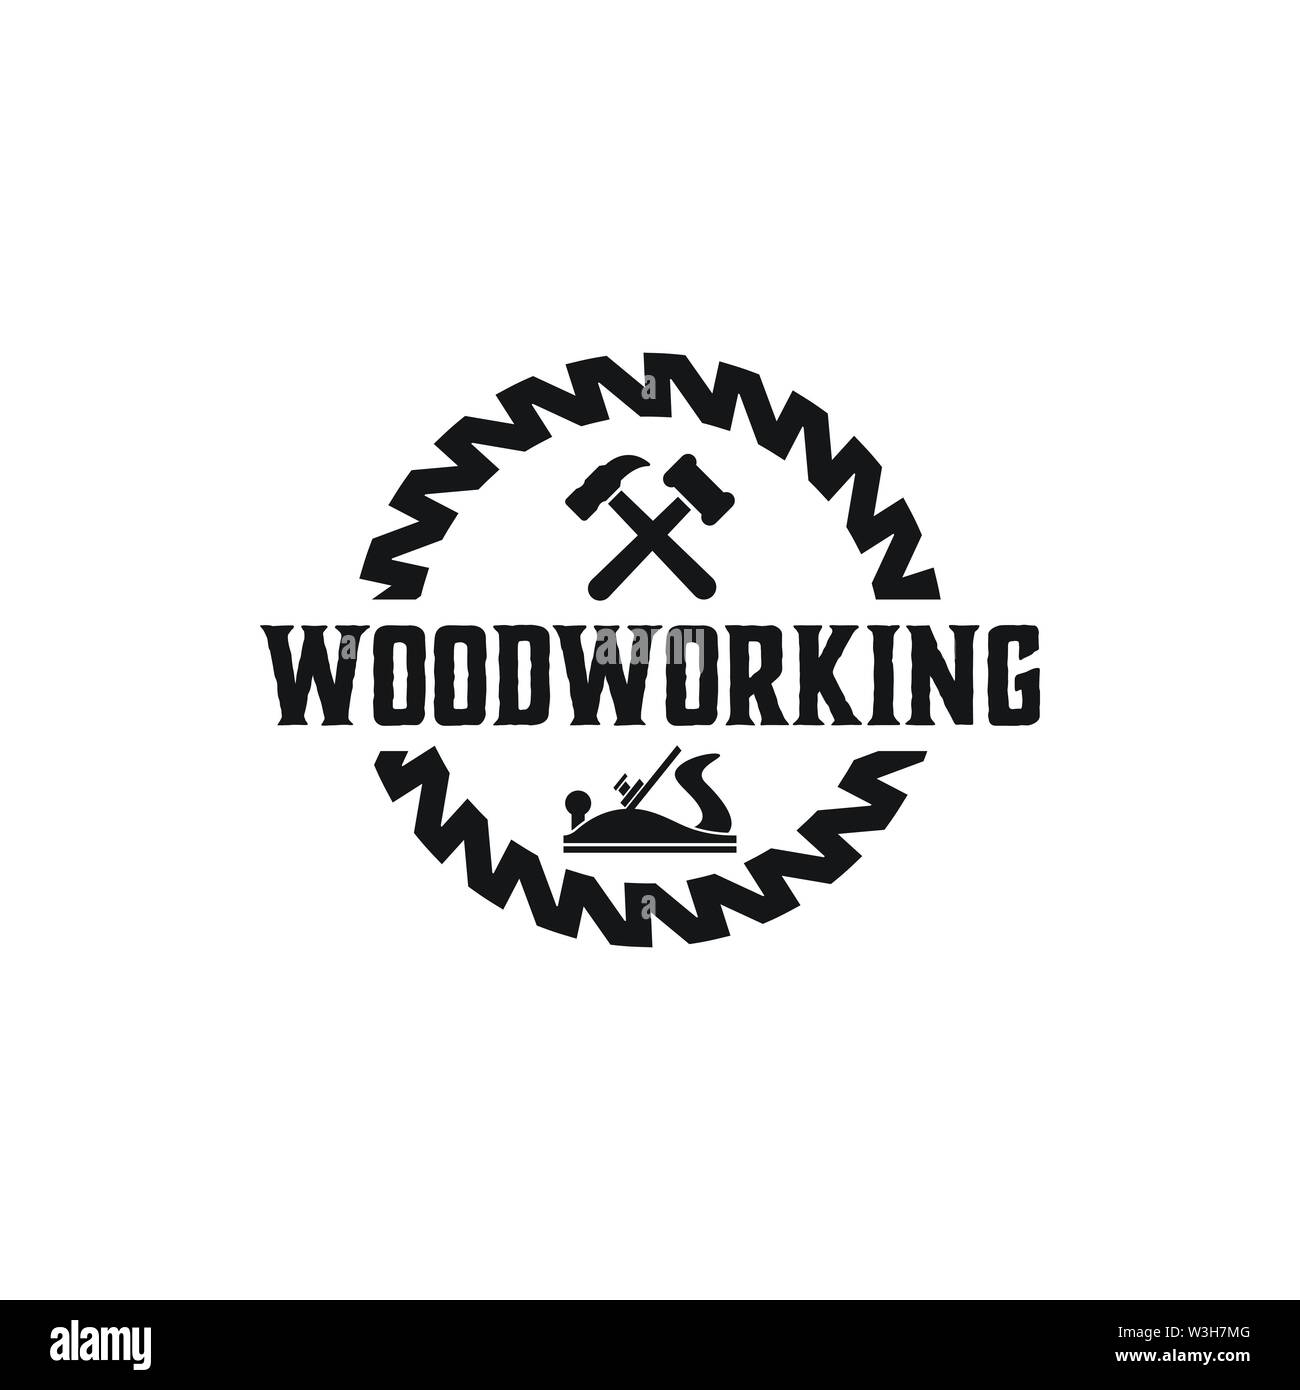 Woodworking gear logo design template vector element isolated Stock Vector